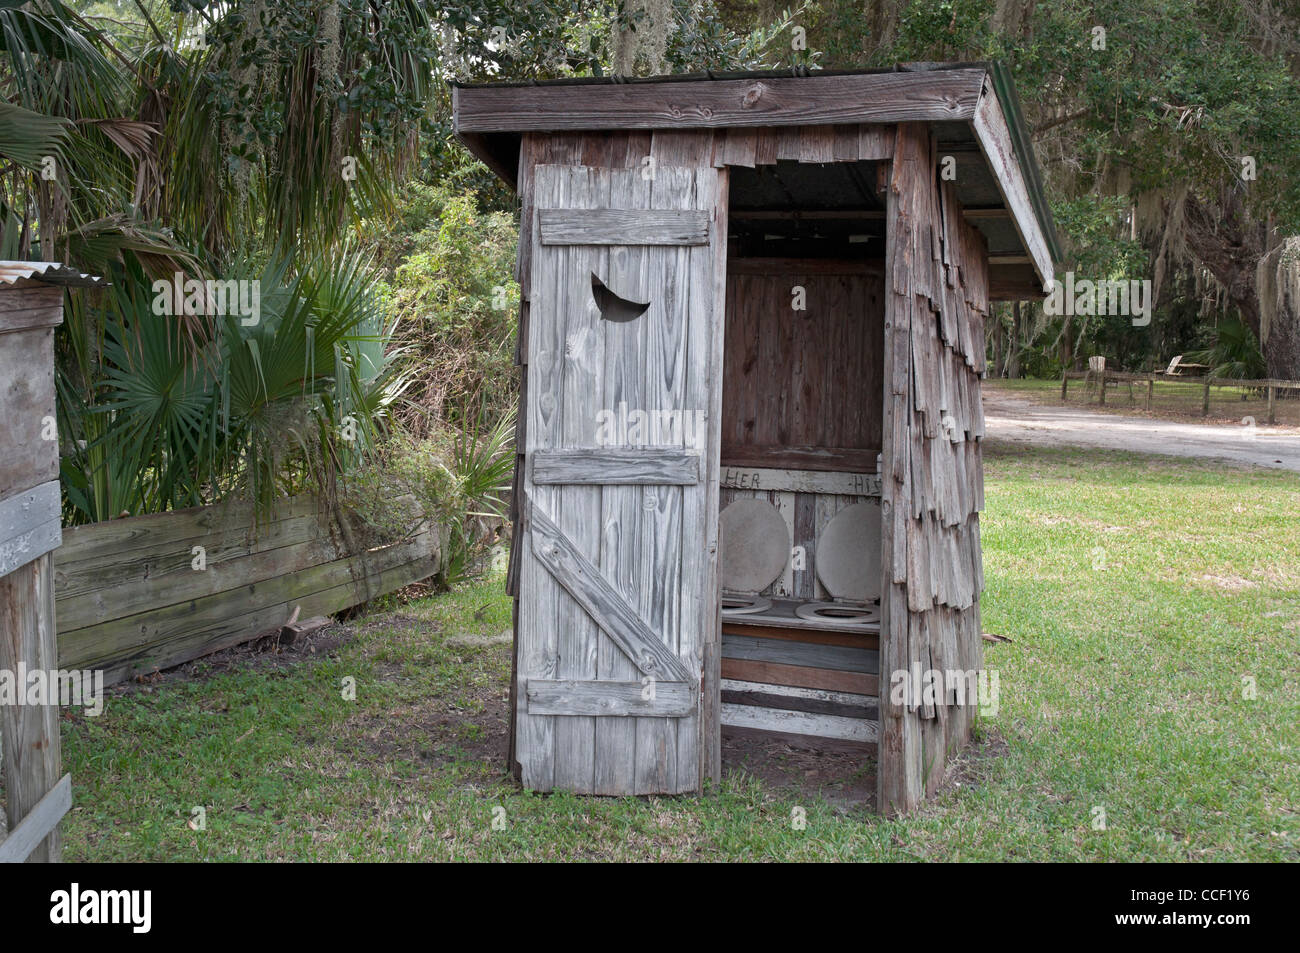 Cross Creek old outhouse with his & hers toilet seats Stock Photo